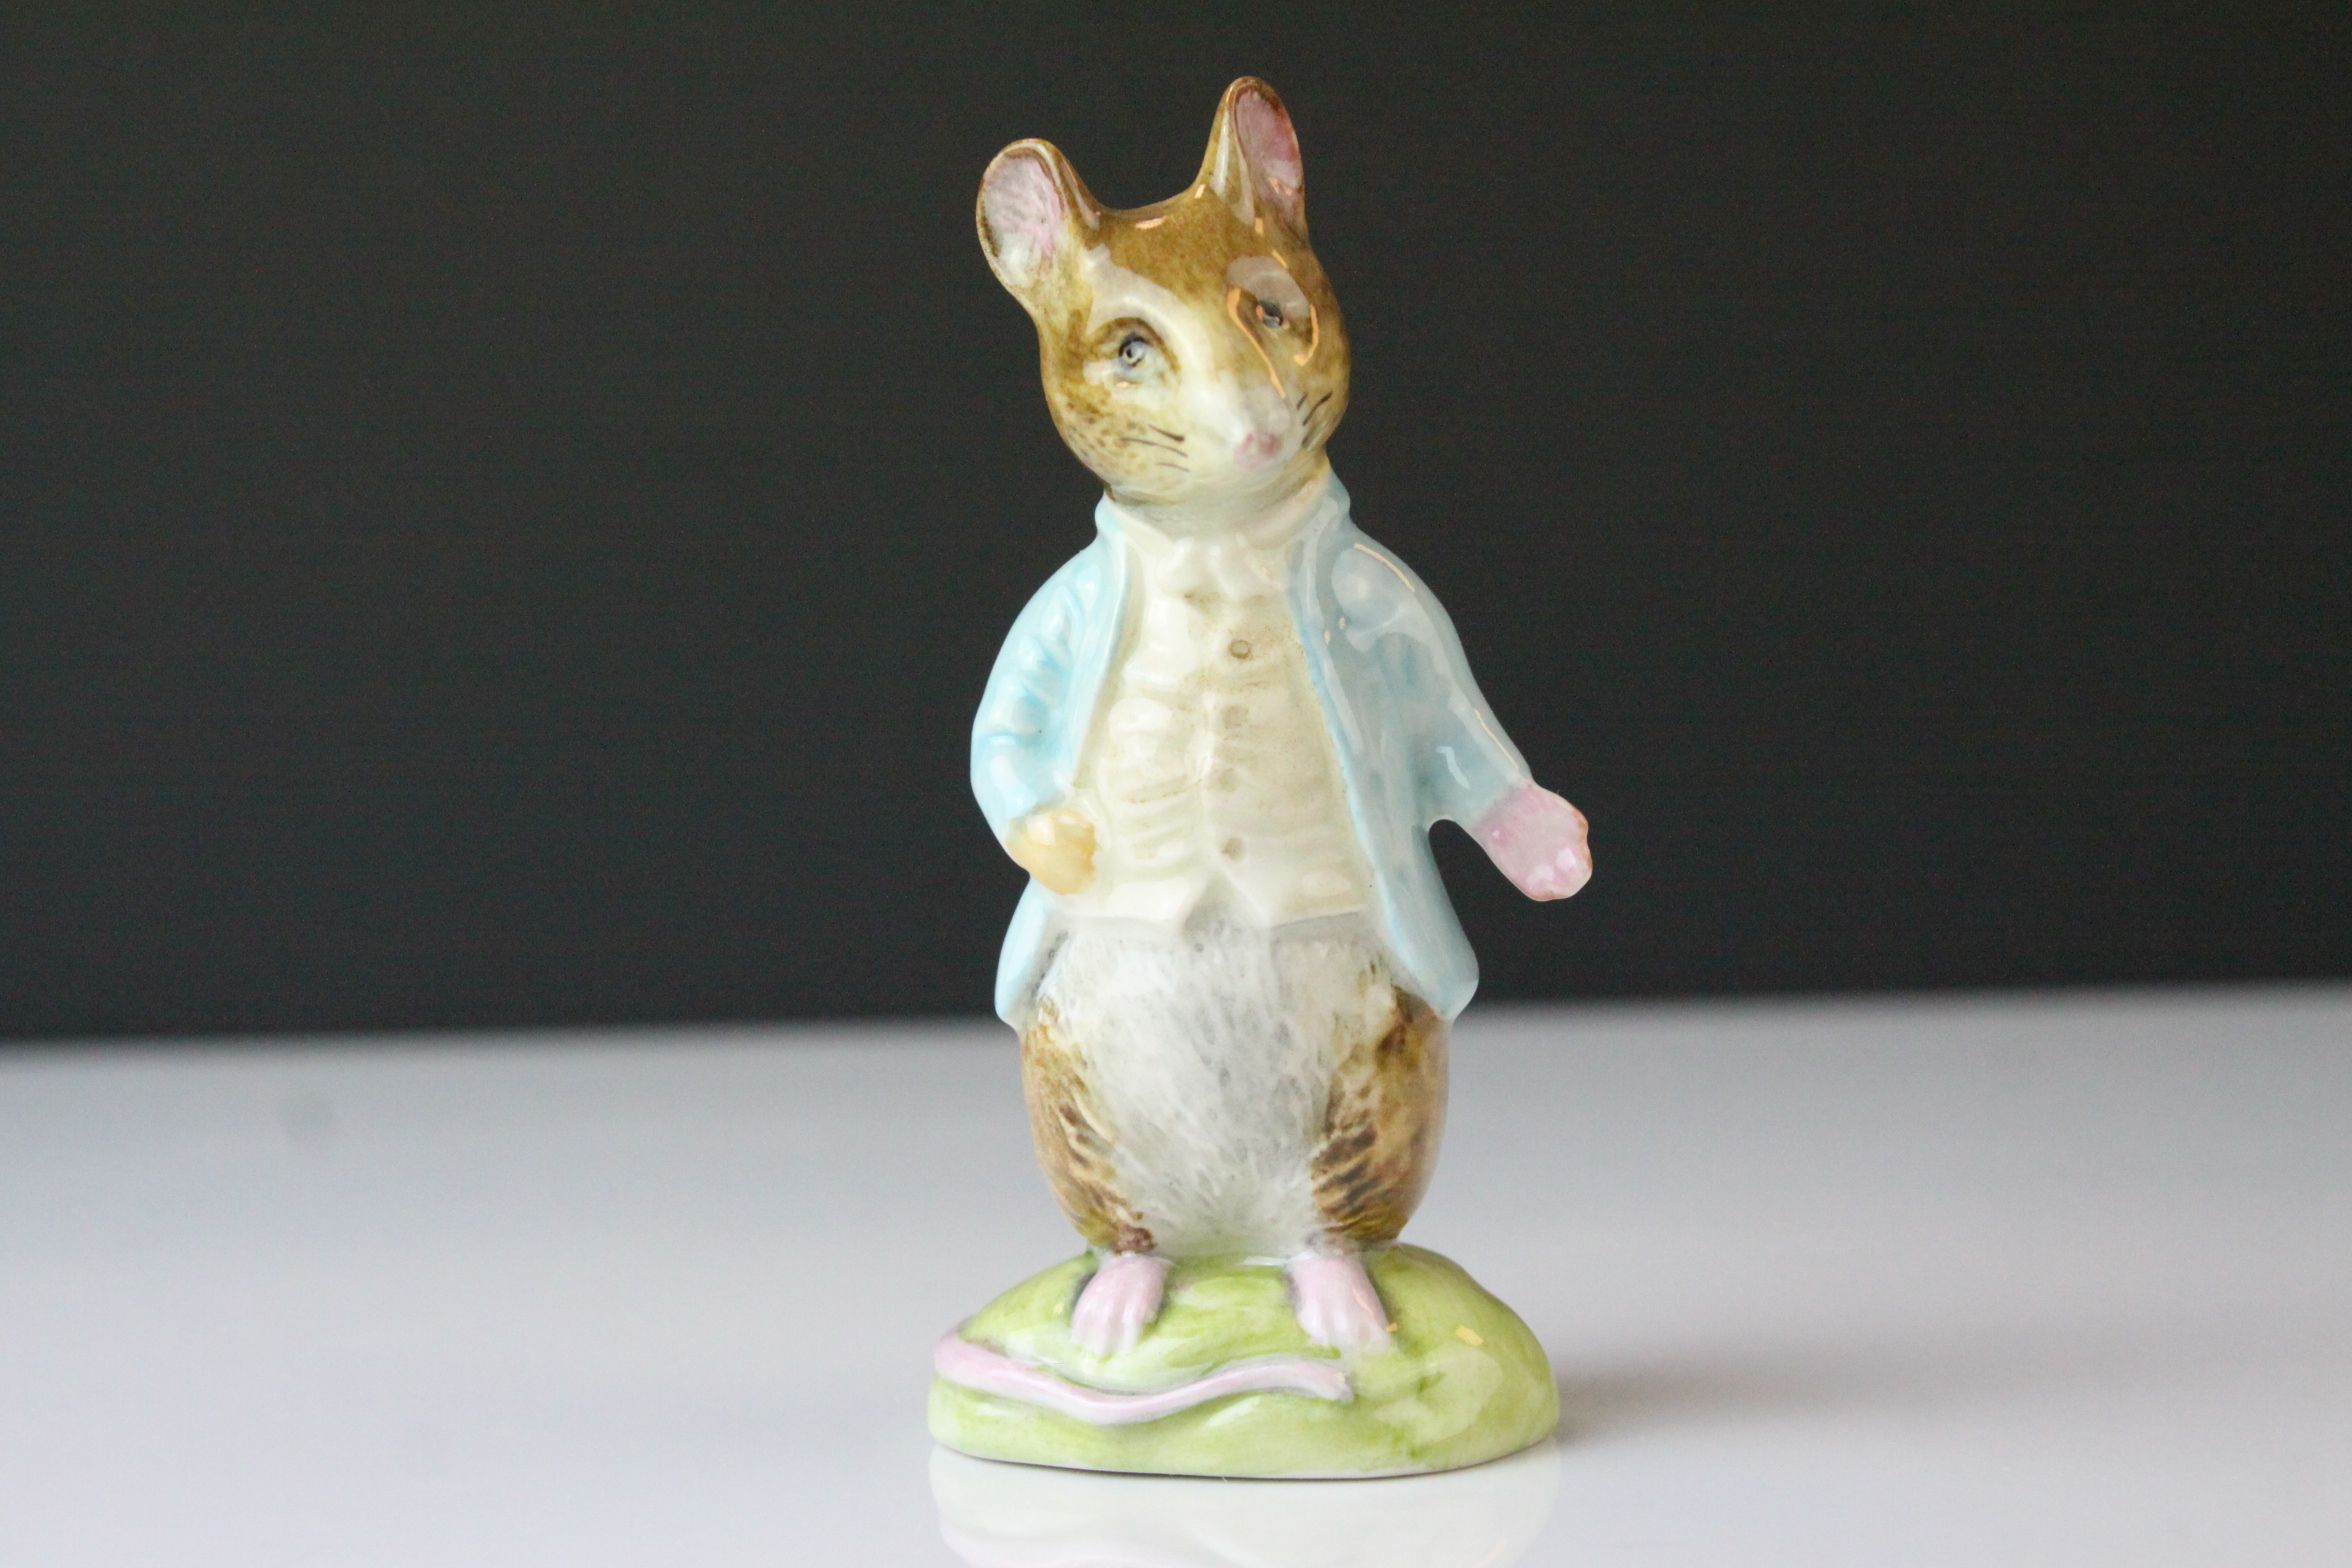 Eleven Beswick Beatrix Potter's Figures including Miss Moppet, Hunca Munca, Flopsy, Mopsy and - Image 30 of 35